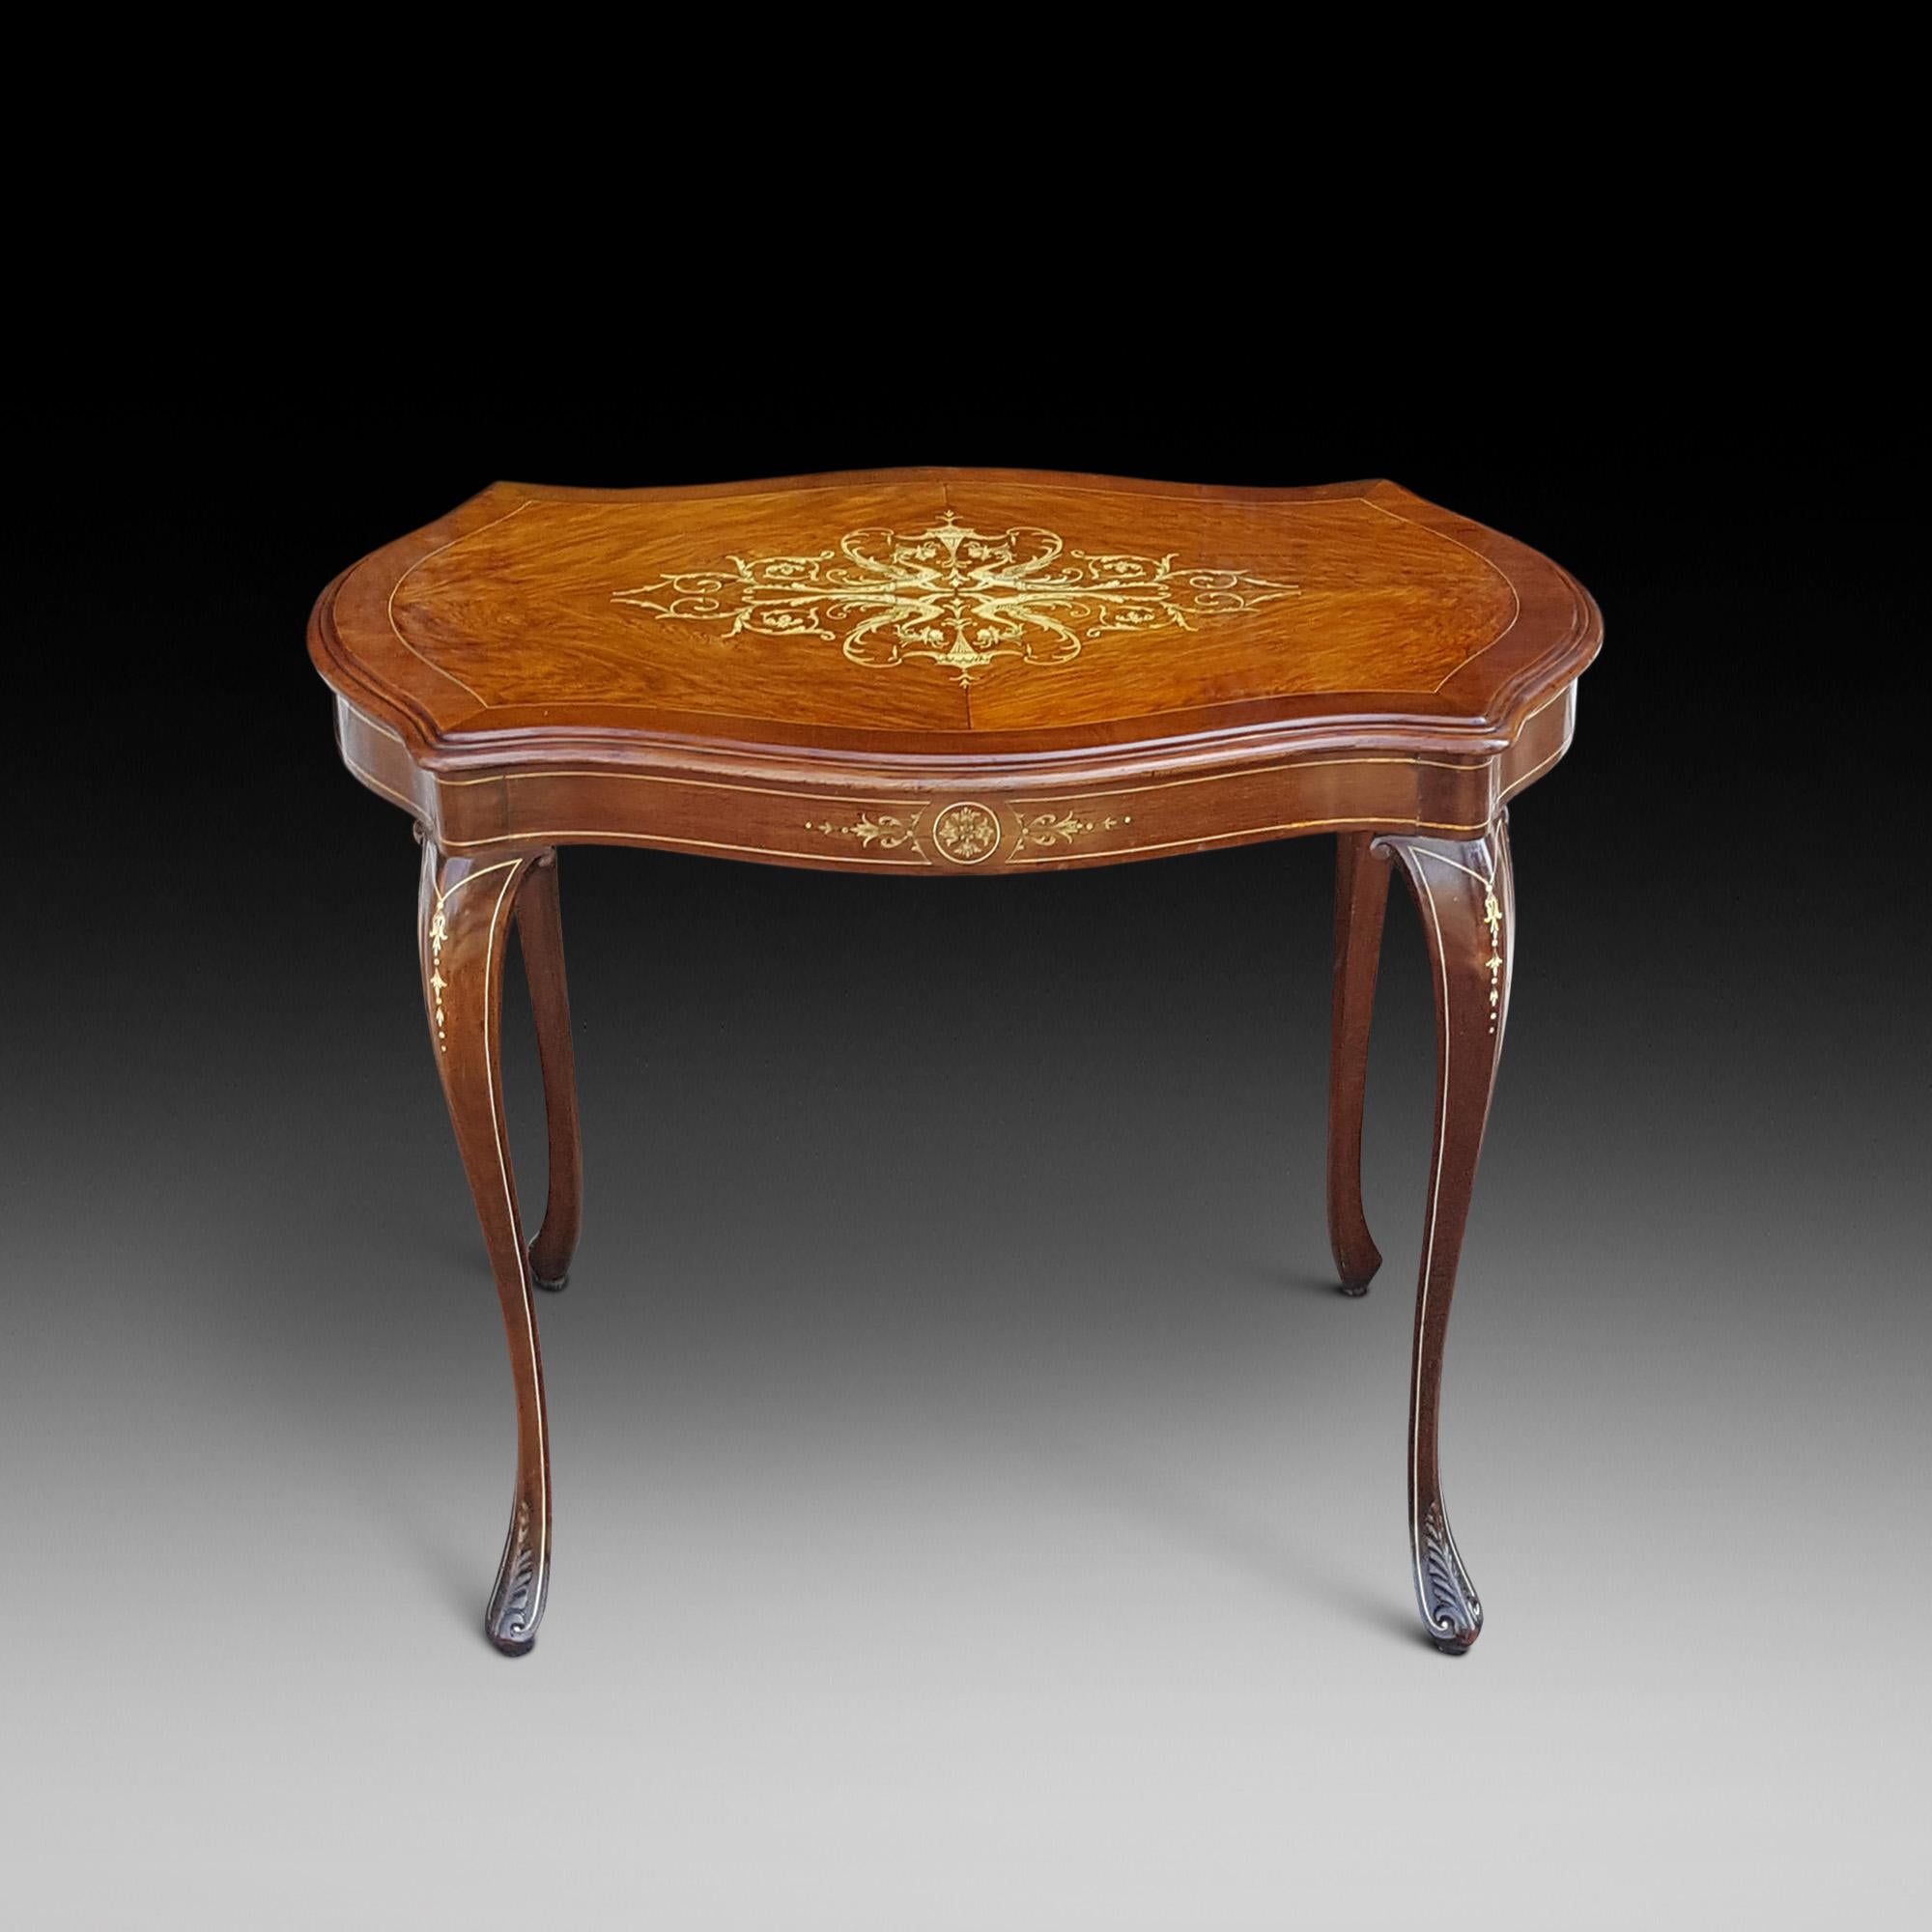 Edwardian rosewood and bone inlaid occasional table, circa 1910, the intricate inlays to the top depicting Wyverns supporting a torchers, rosette inlays to the frieze, and bellflowers on the cabriole leg.
Measures: 33